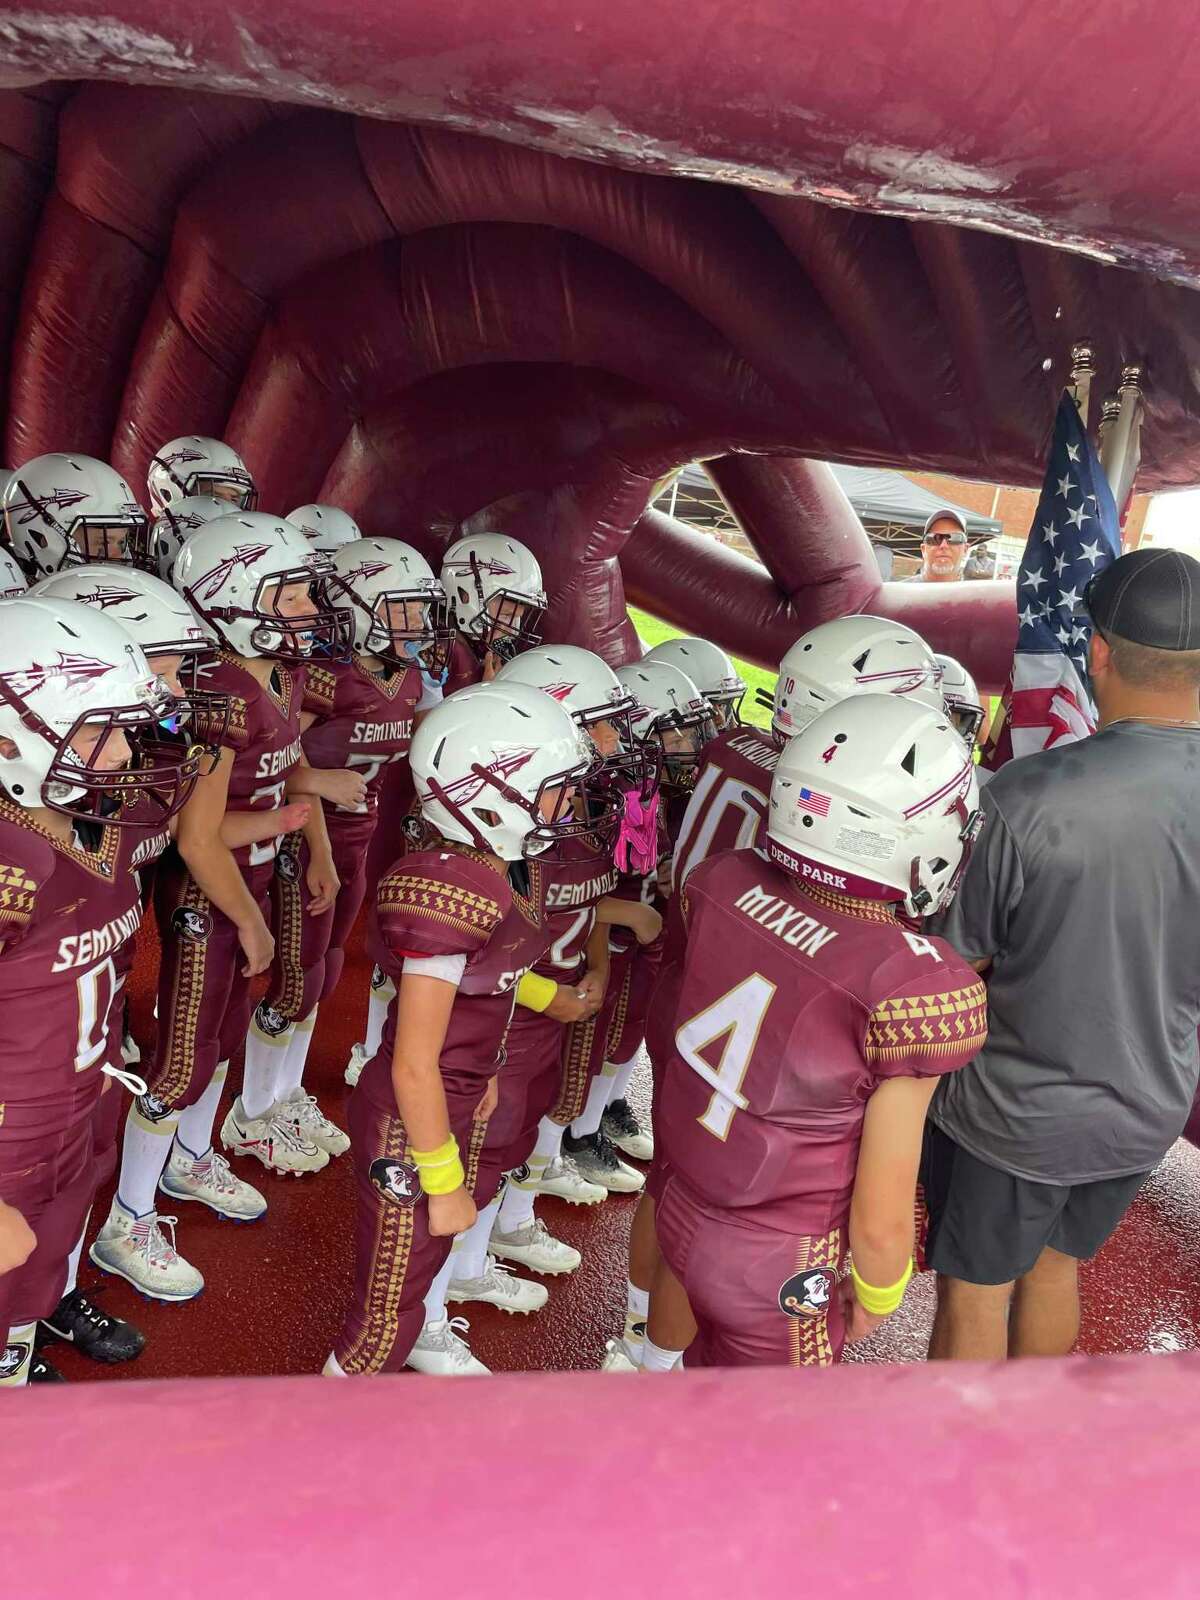 The Junior Deer Park Seminoles wait in the team's giant  helmet Saturday, before taking the field for their season opener against the Friendswood Colts.